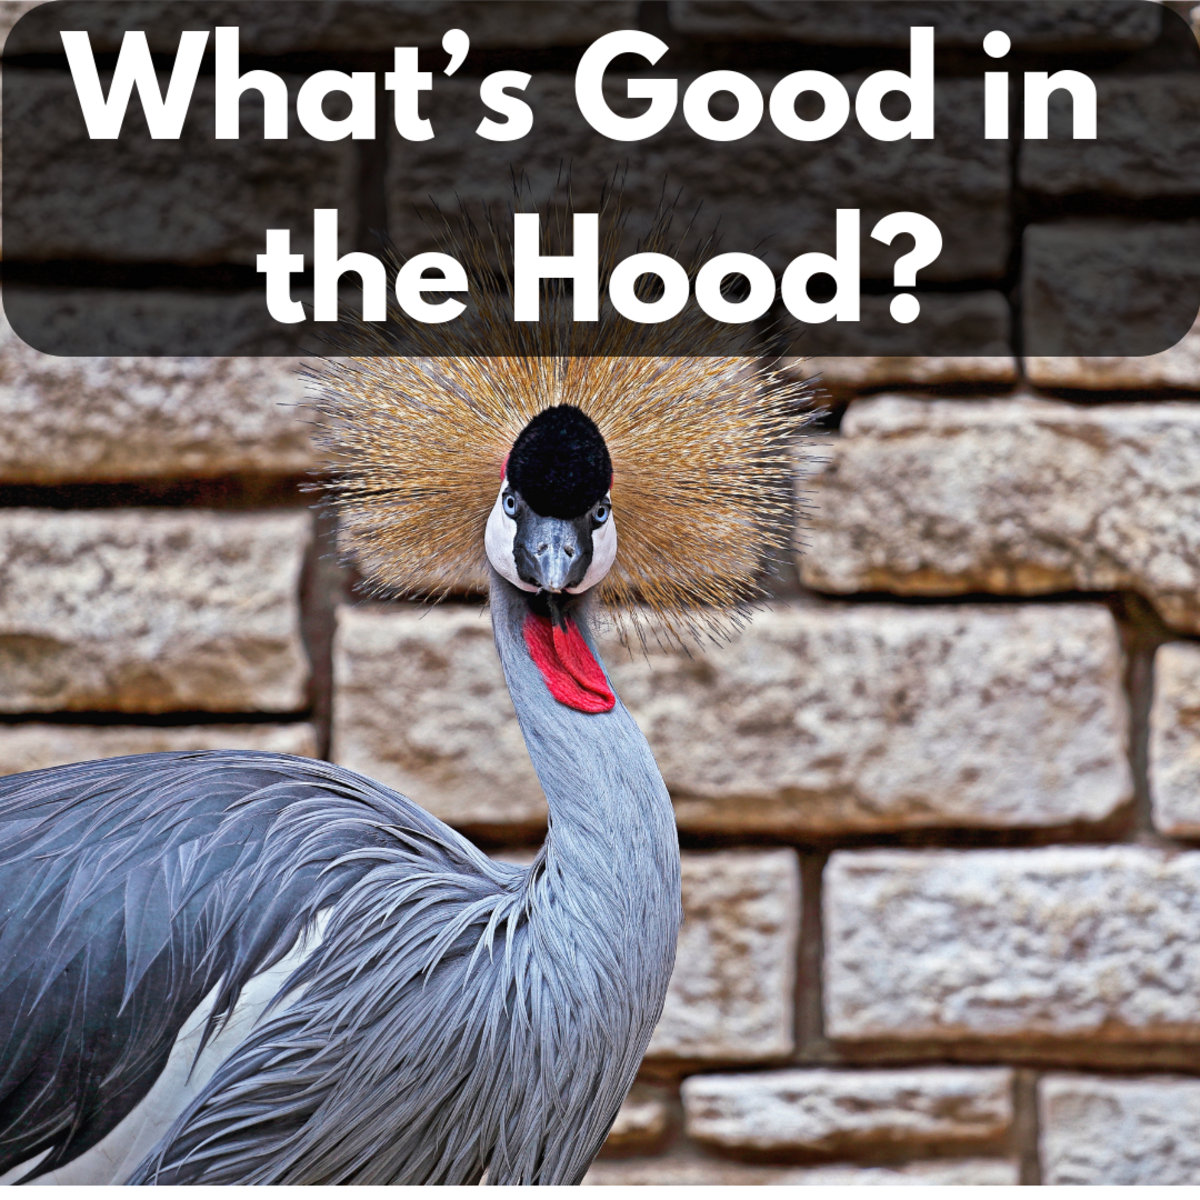 What's Good in the Hood?